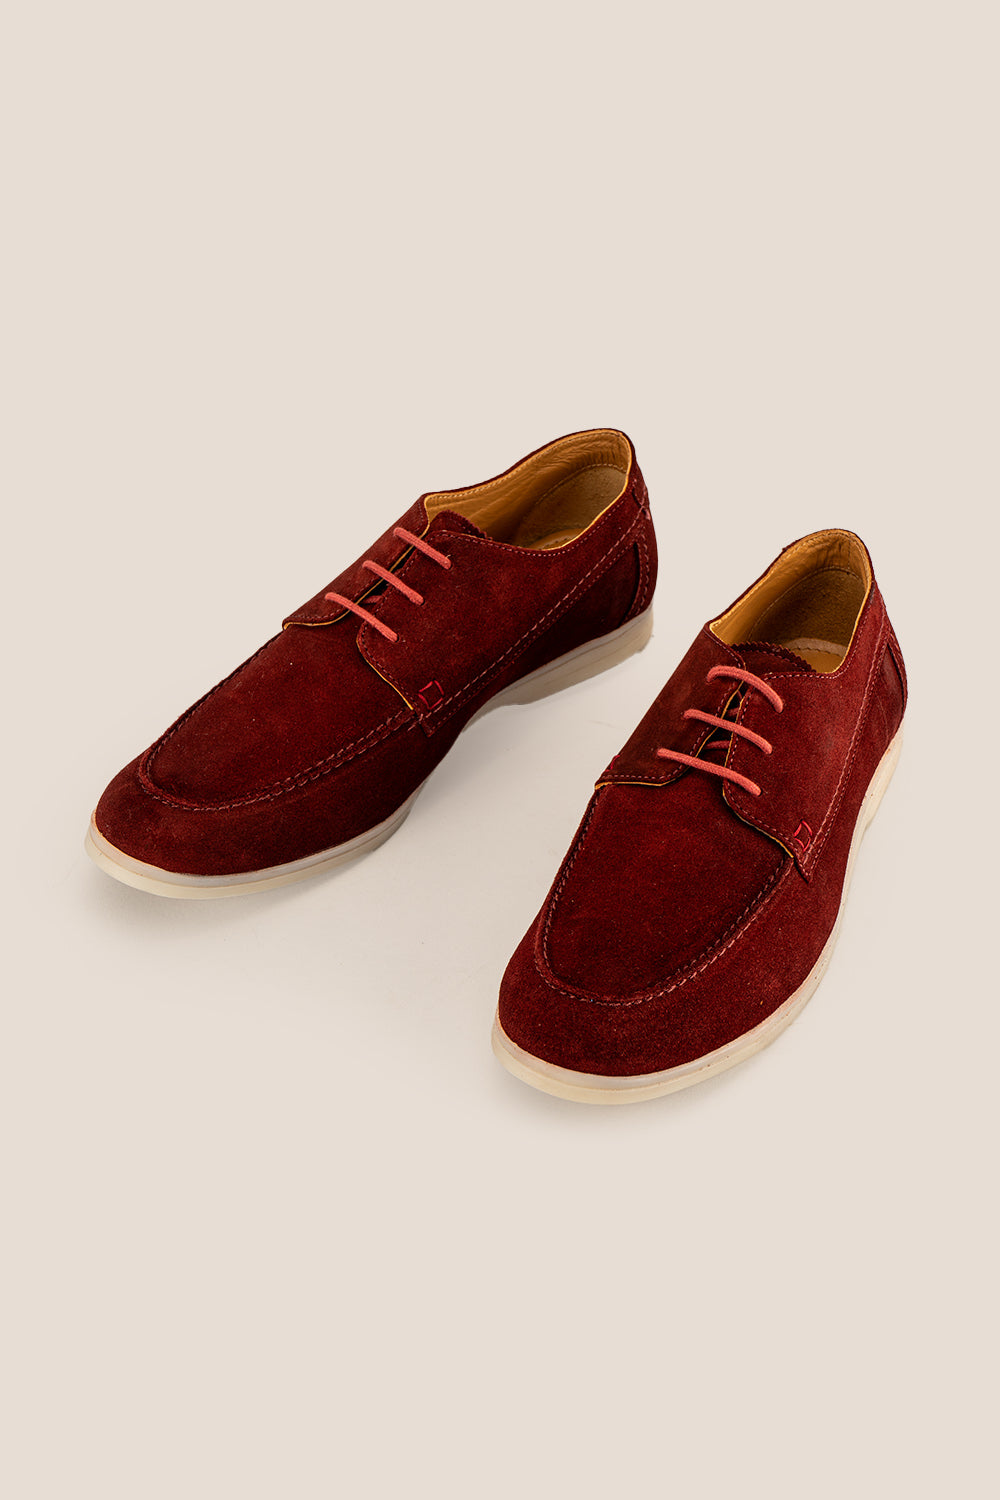 Eric Red suede mens deck shoe oswin hyde 